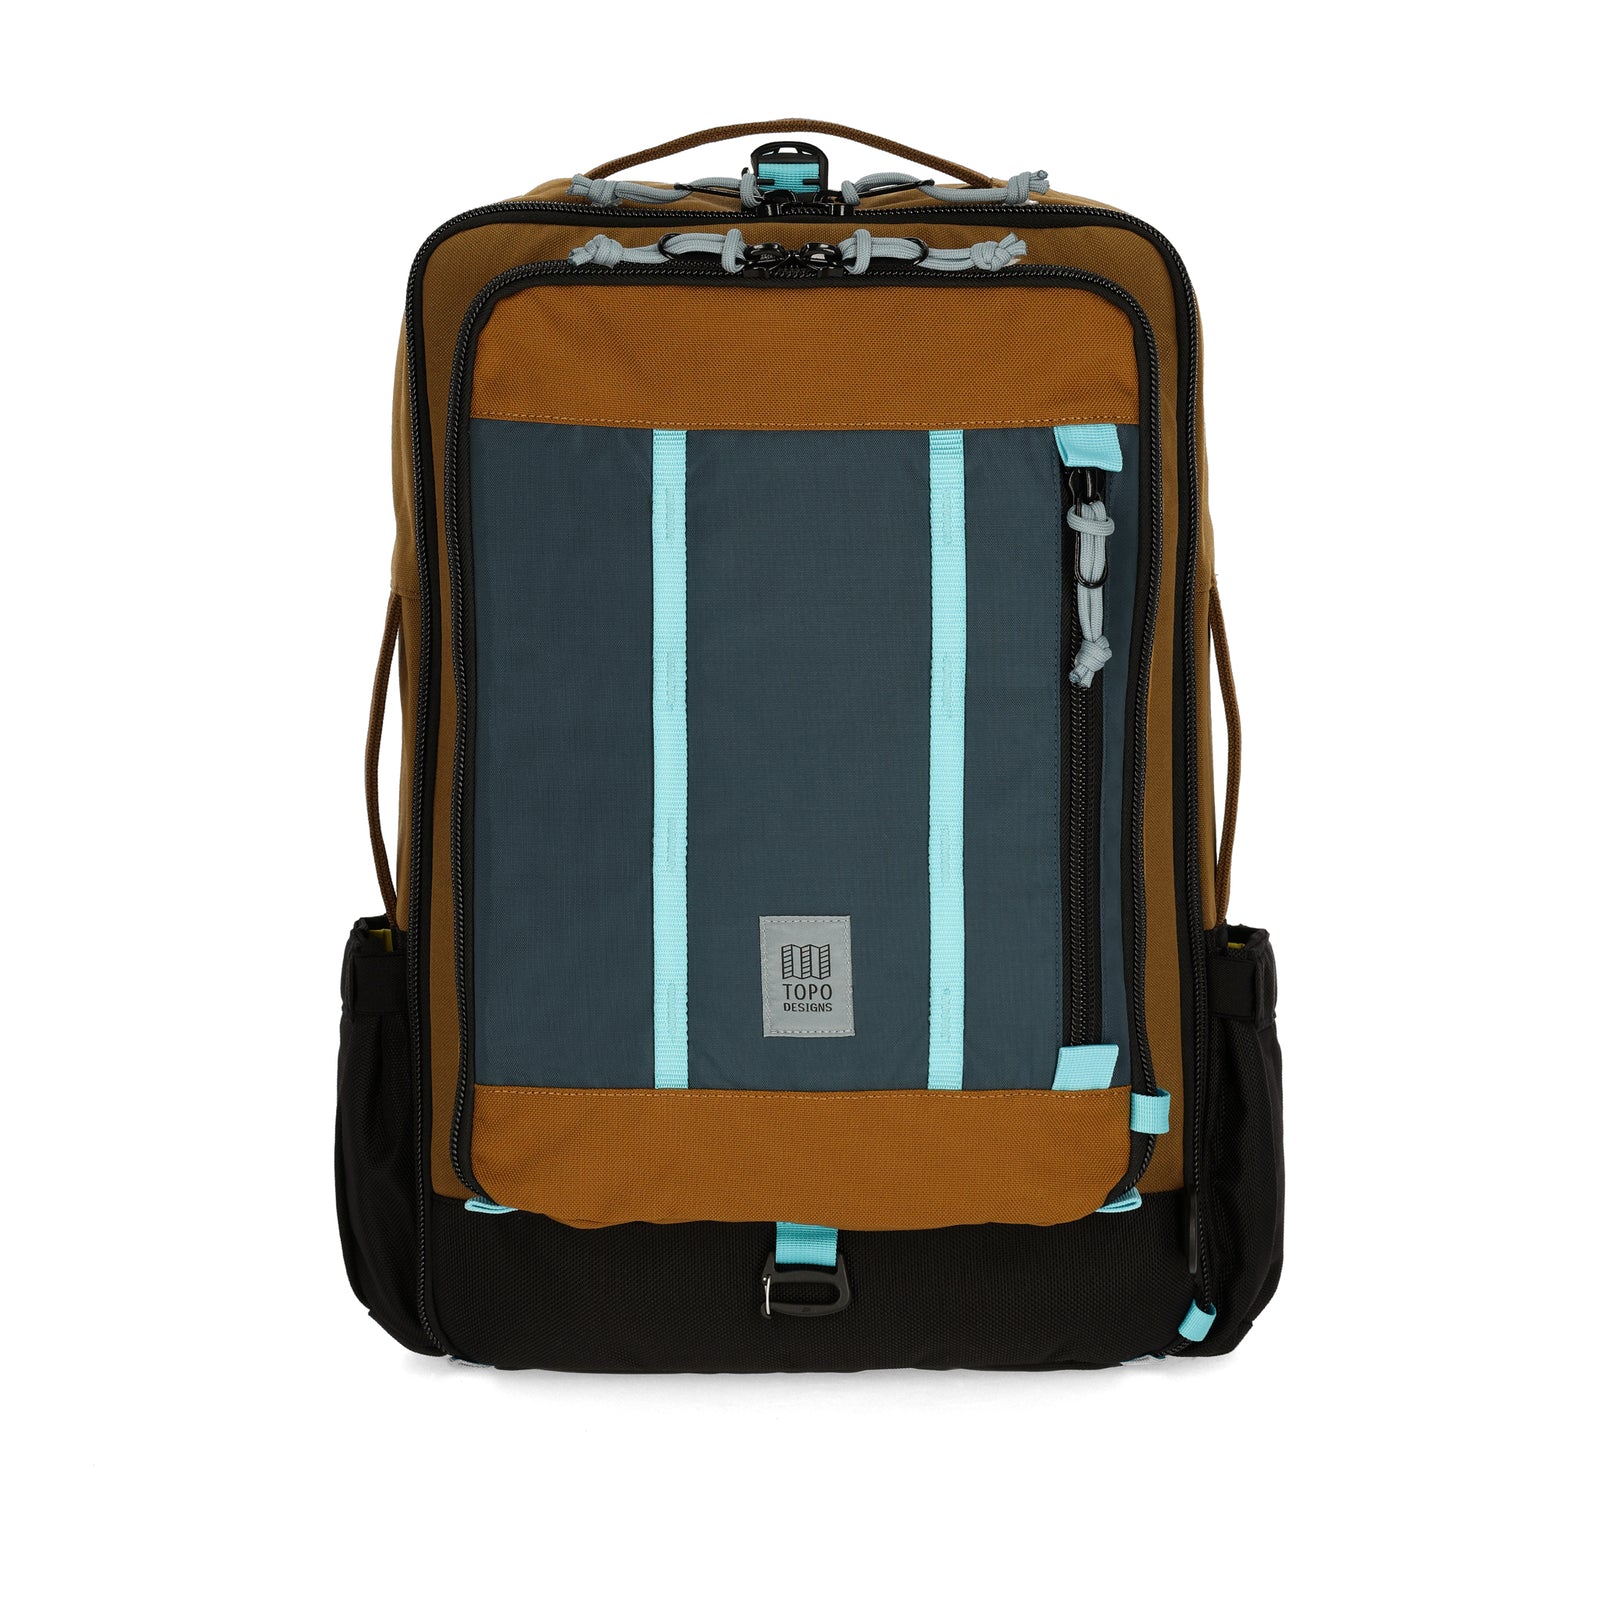 Topo Designs Global Travel Bag 30L Durable Carry On Convertible Laptop Travel Backpack in "Desert Palm / Pond Blue".